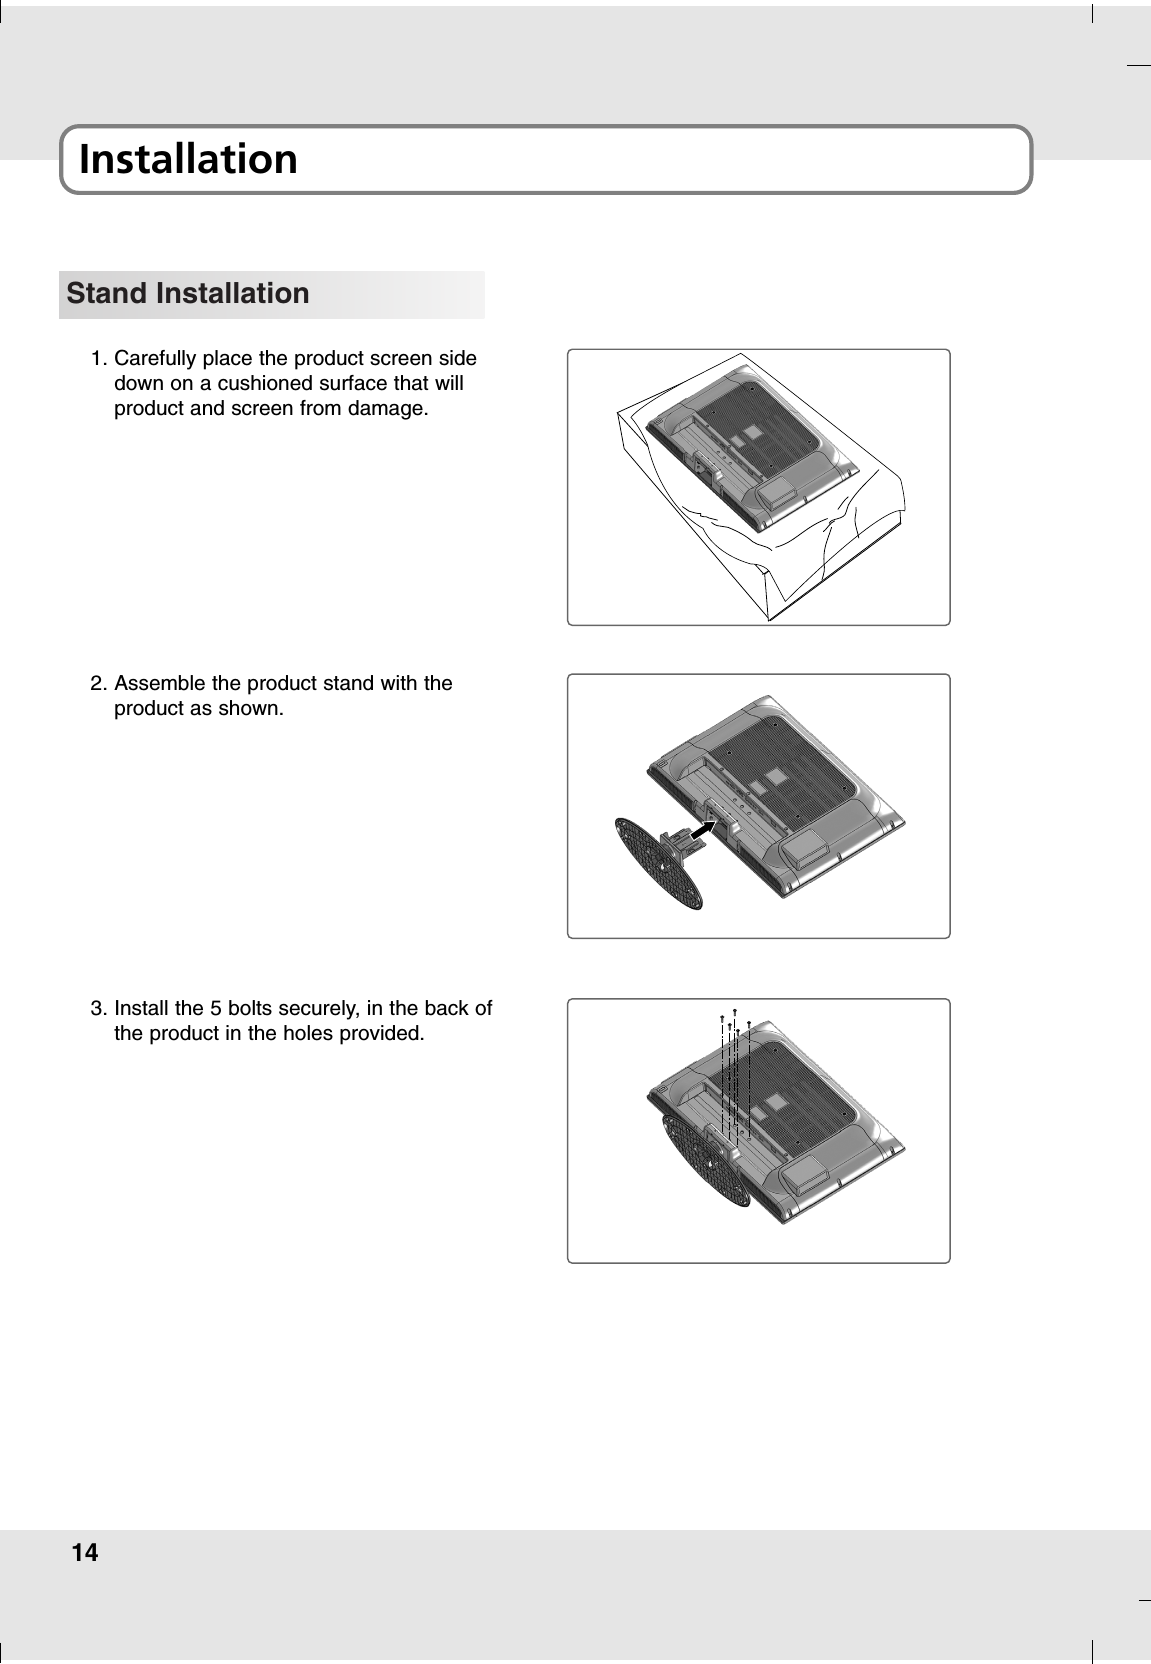 14Installation Stand Installation1. Carefully place the product screen sidedown on a cushioned surface that will product and screen from damage.2. Assemble the product stand with the product as shown.3. Install the 5 bolts securely, in the back ofthe product in the holes provided.